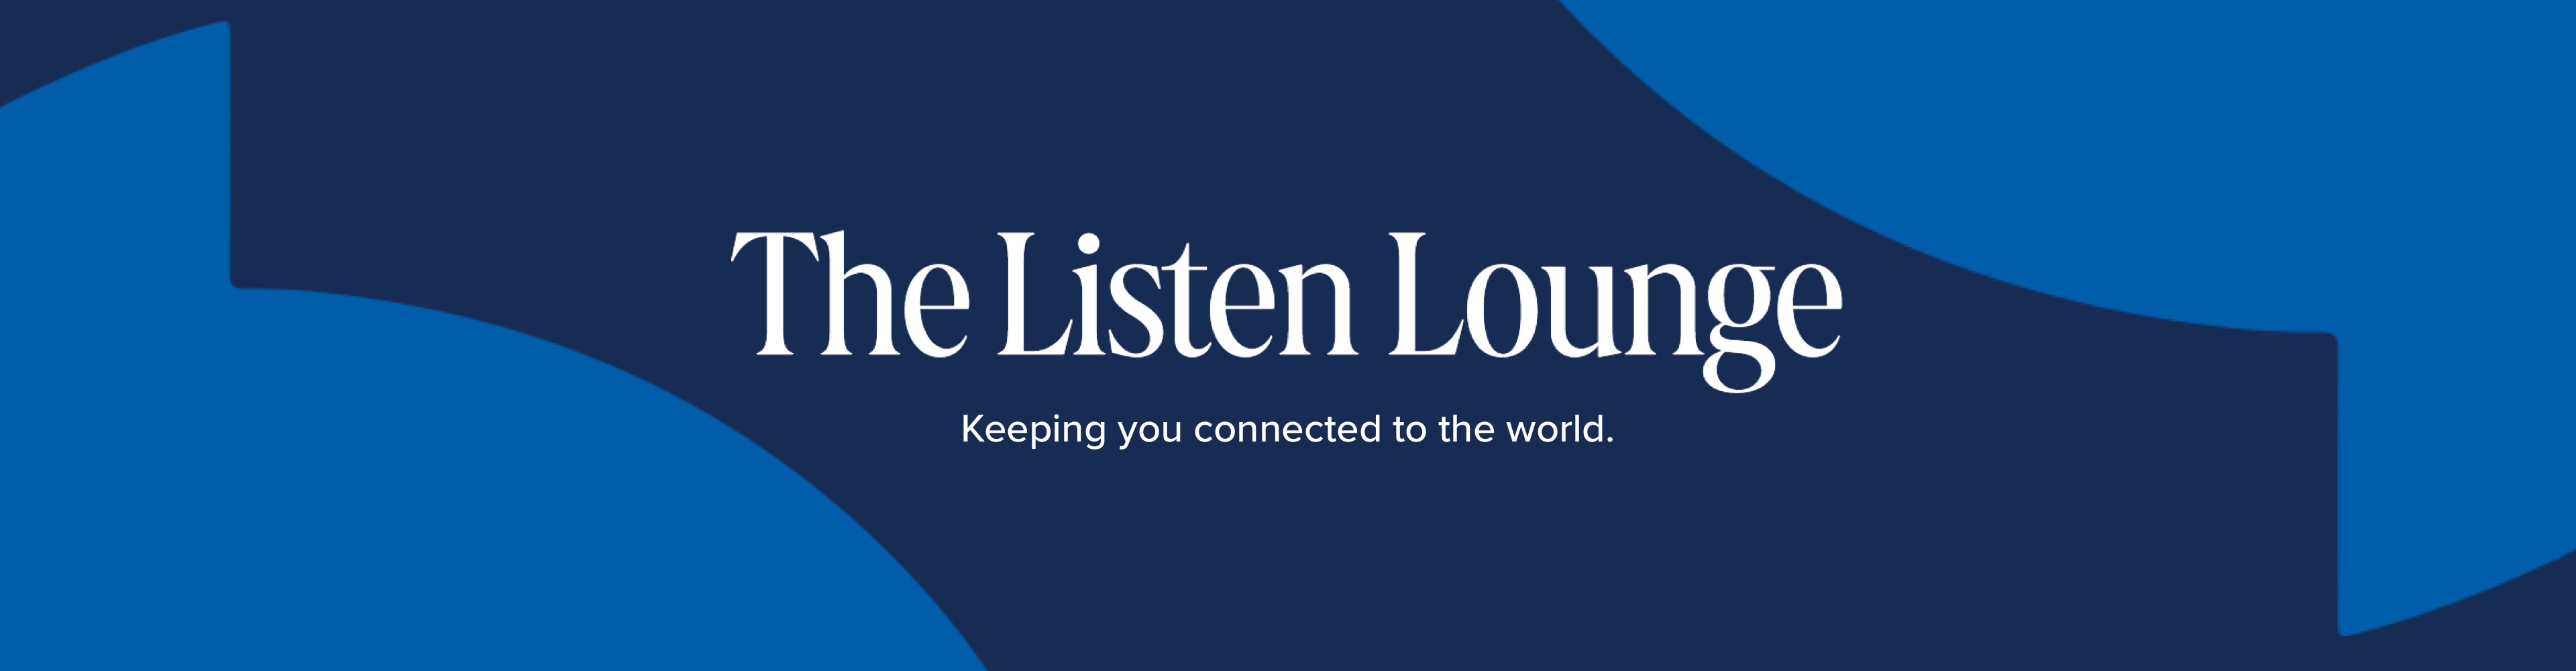 The Listen Lounge - Keeping you connected to the world.